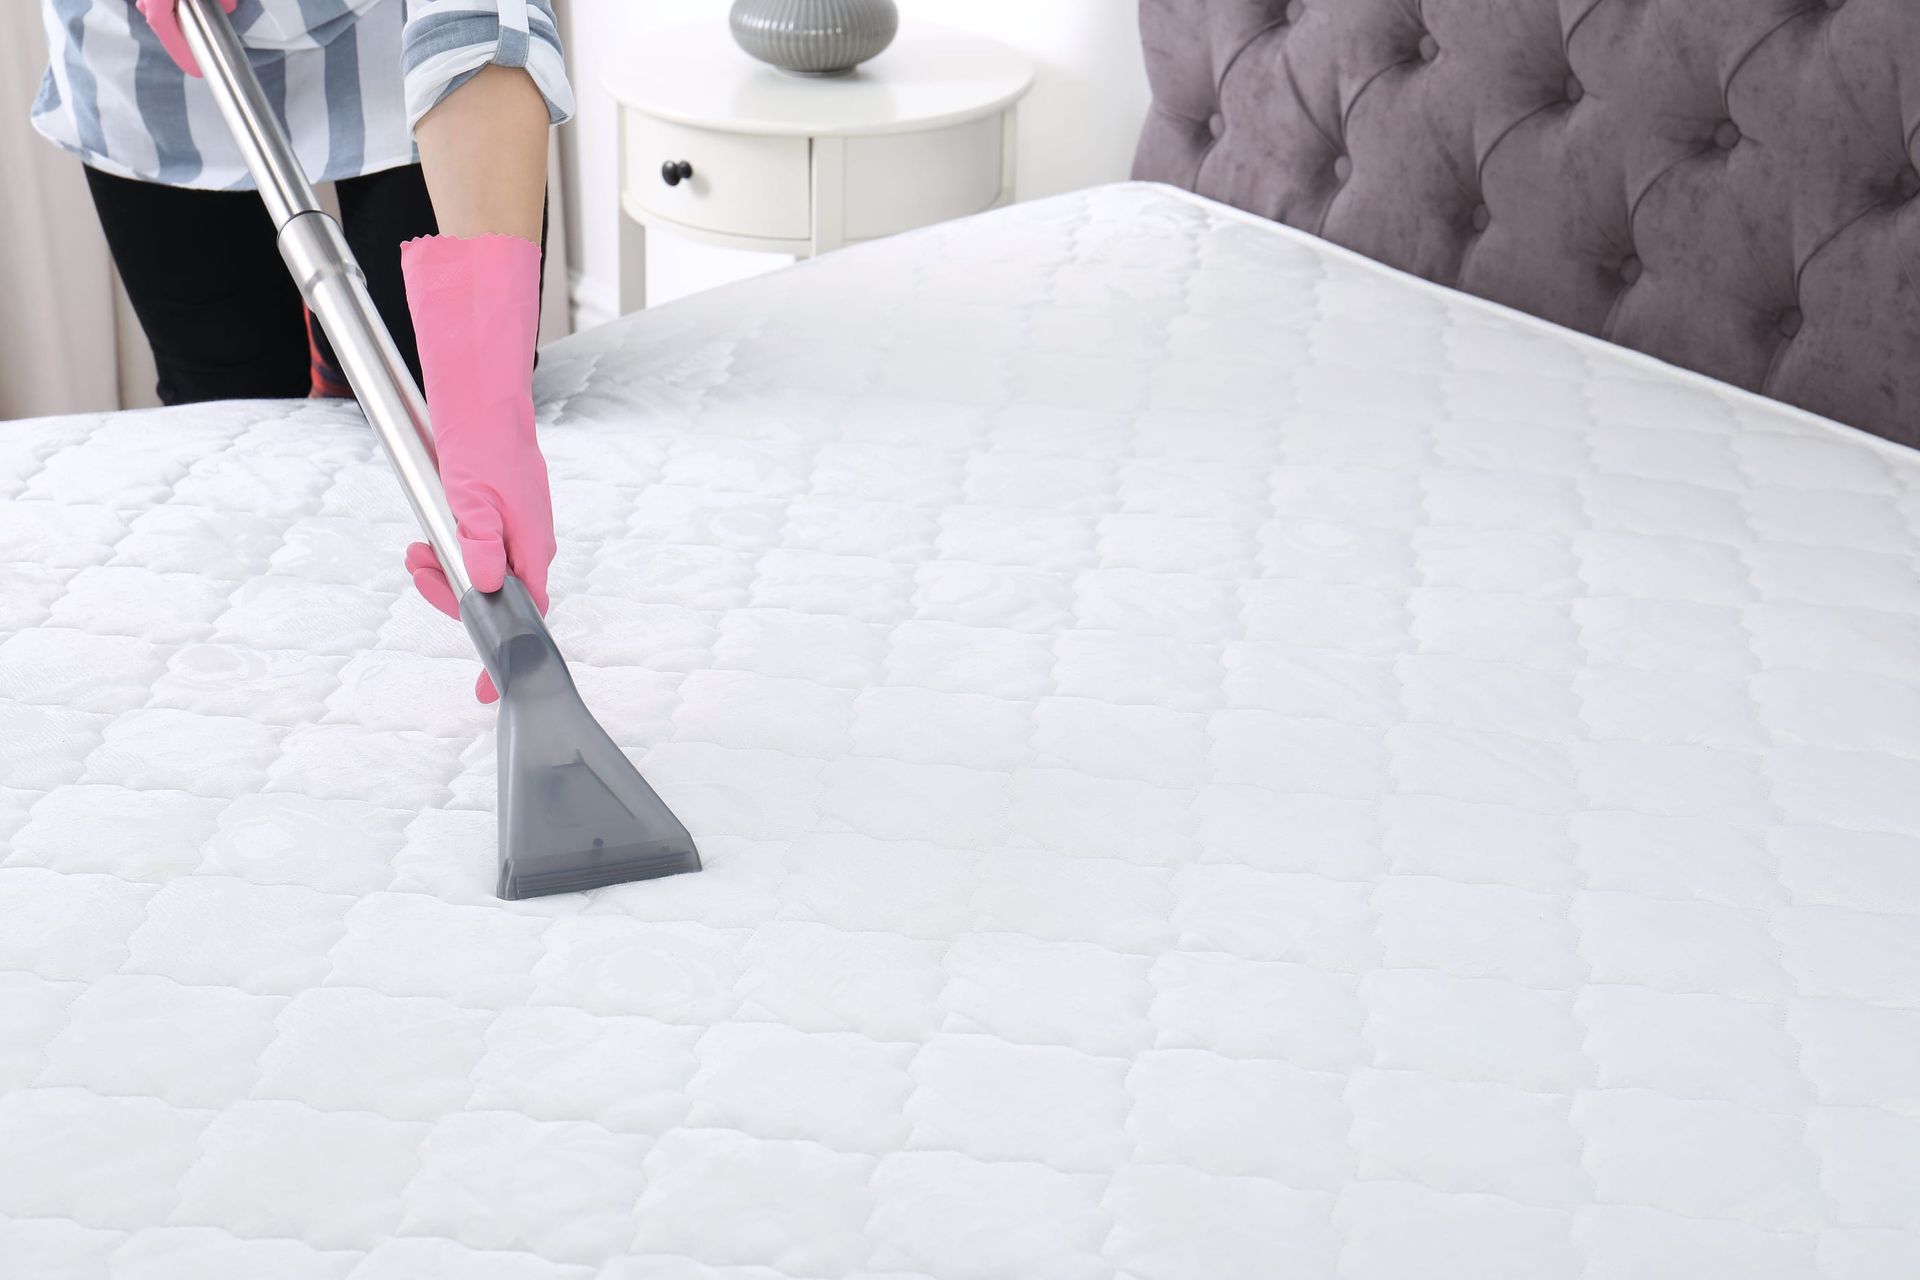 A person using a handheld vacuum cleaner to clean a mattress surface.